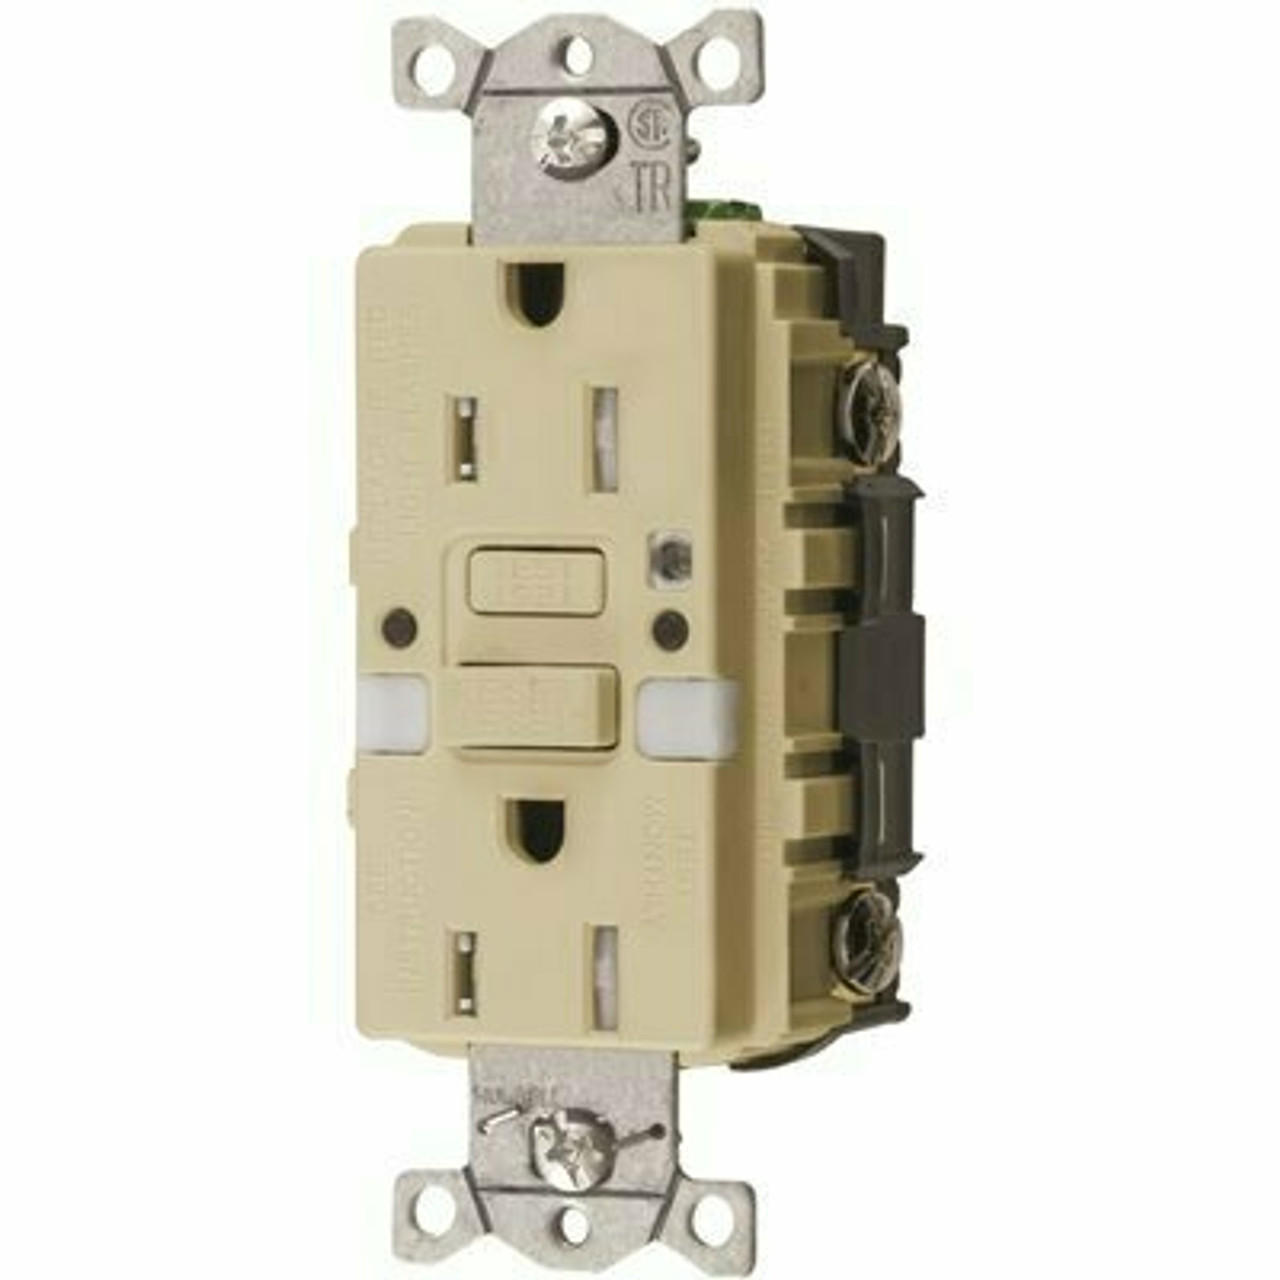 Hubbell Wiring Commercial 15 Amp Tamper Resistant Gfci Duplex Outlet, Ivory - 314045736